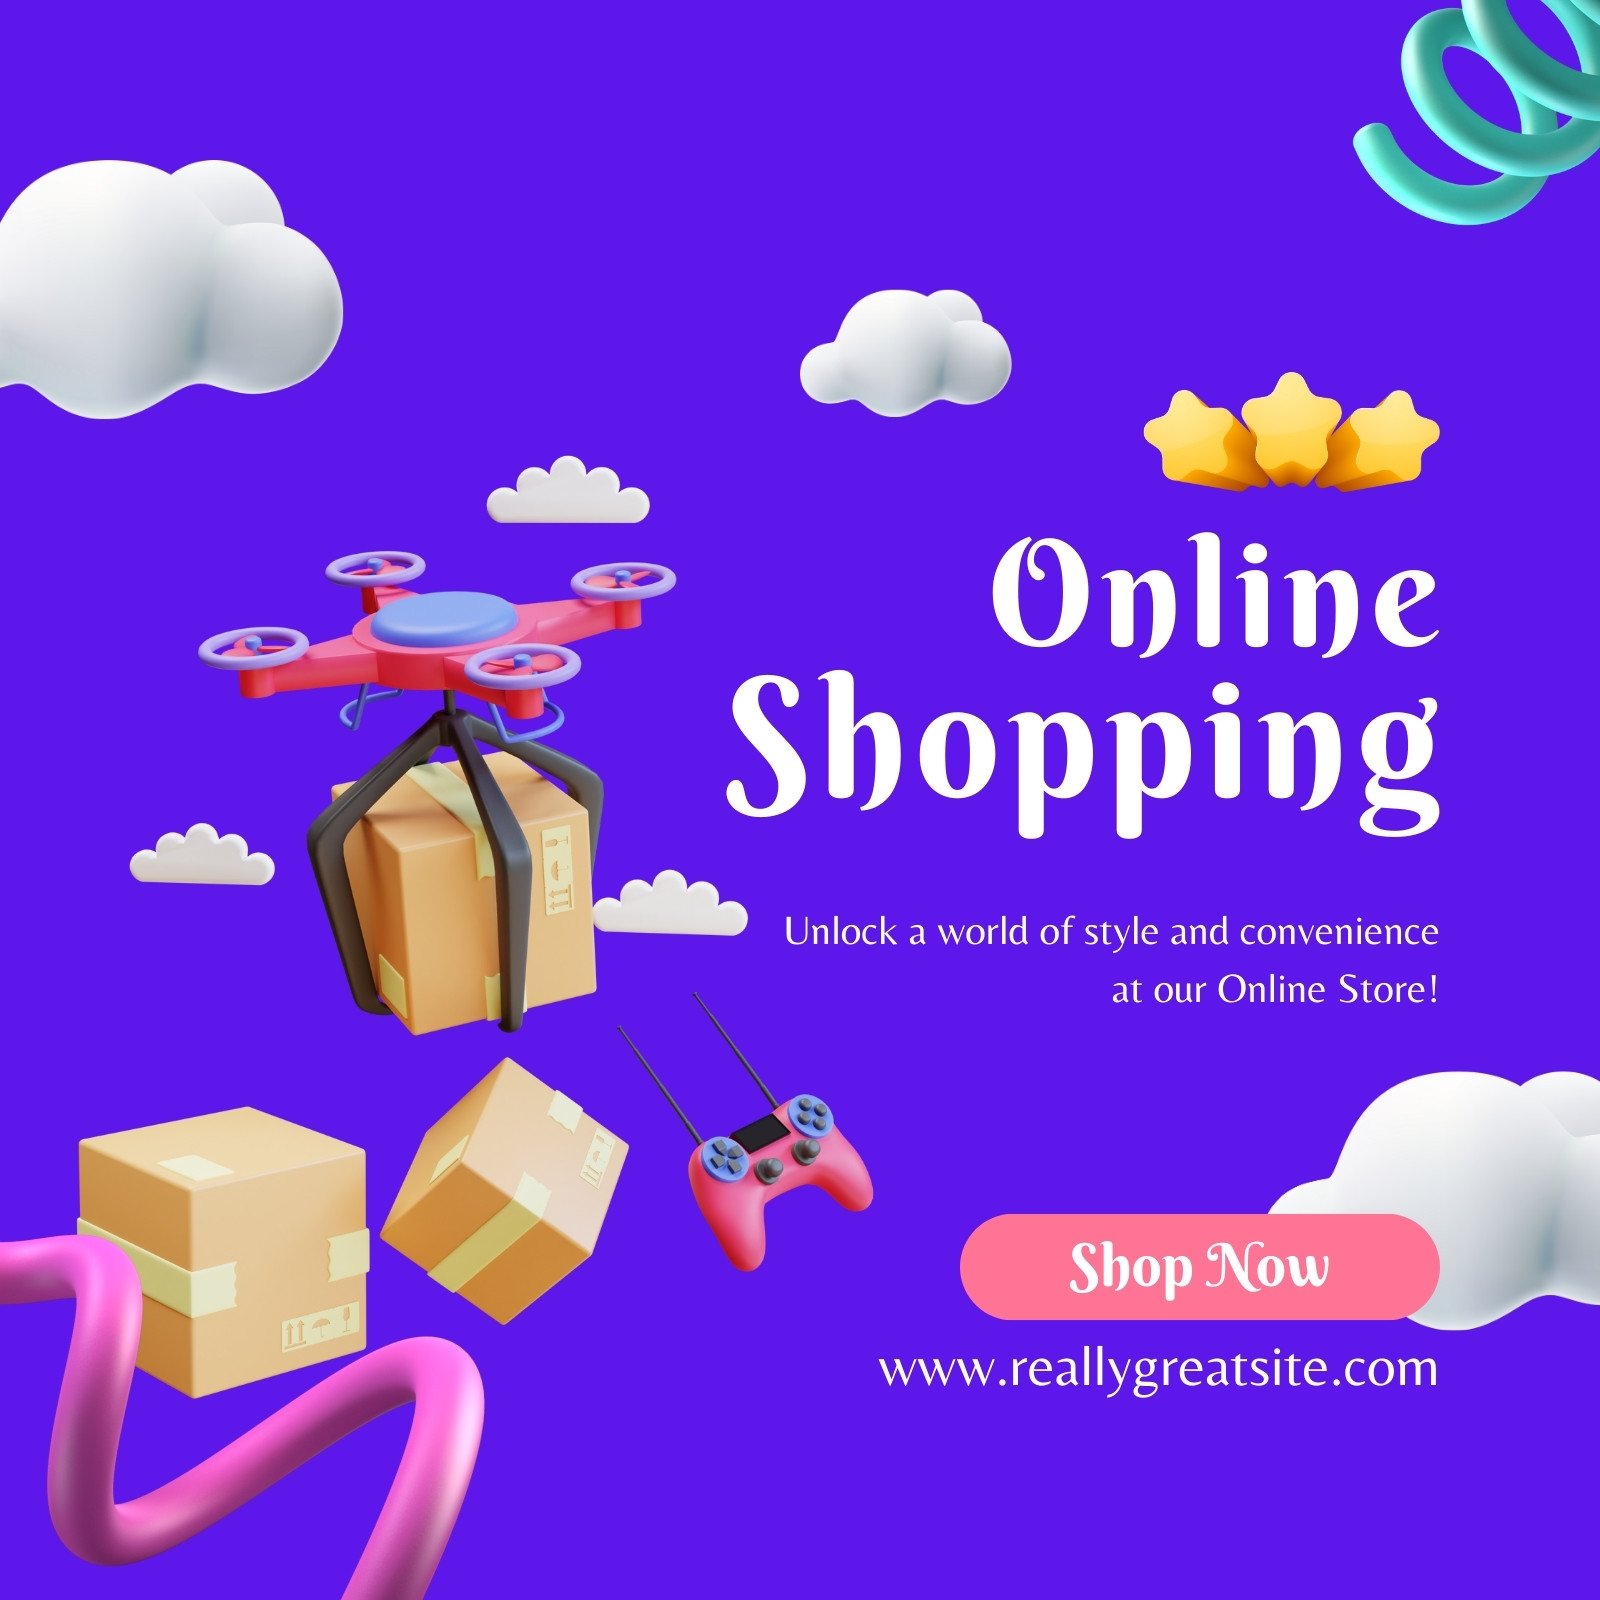 Shop at our Online Store